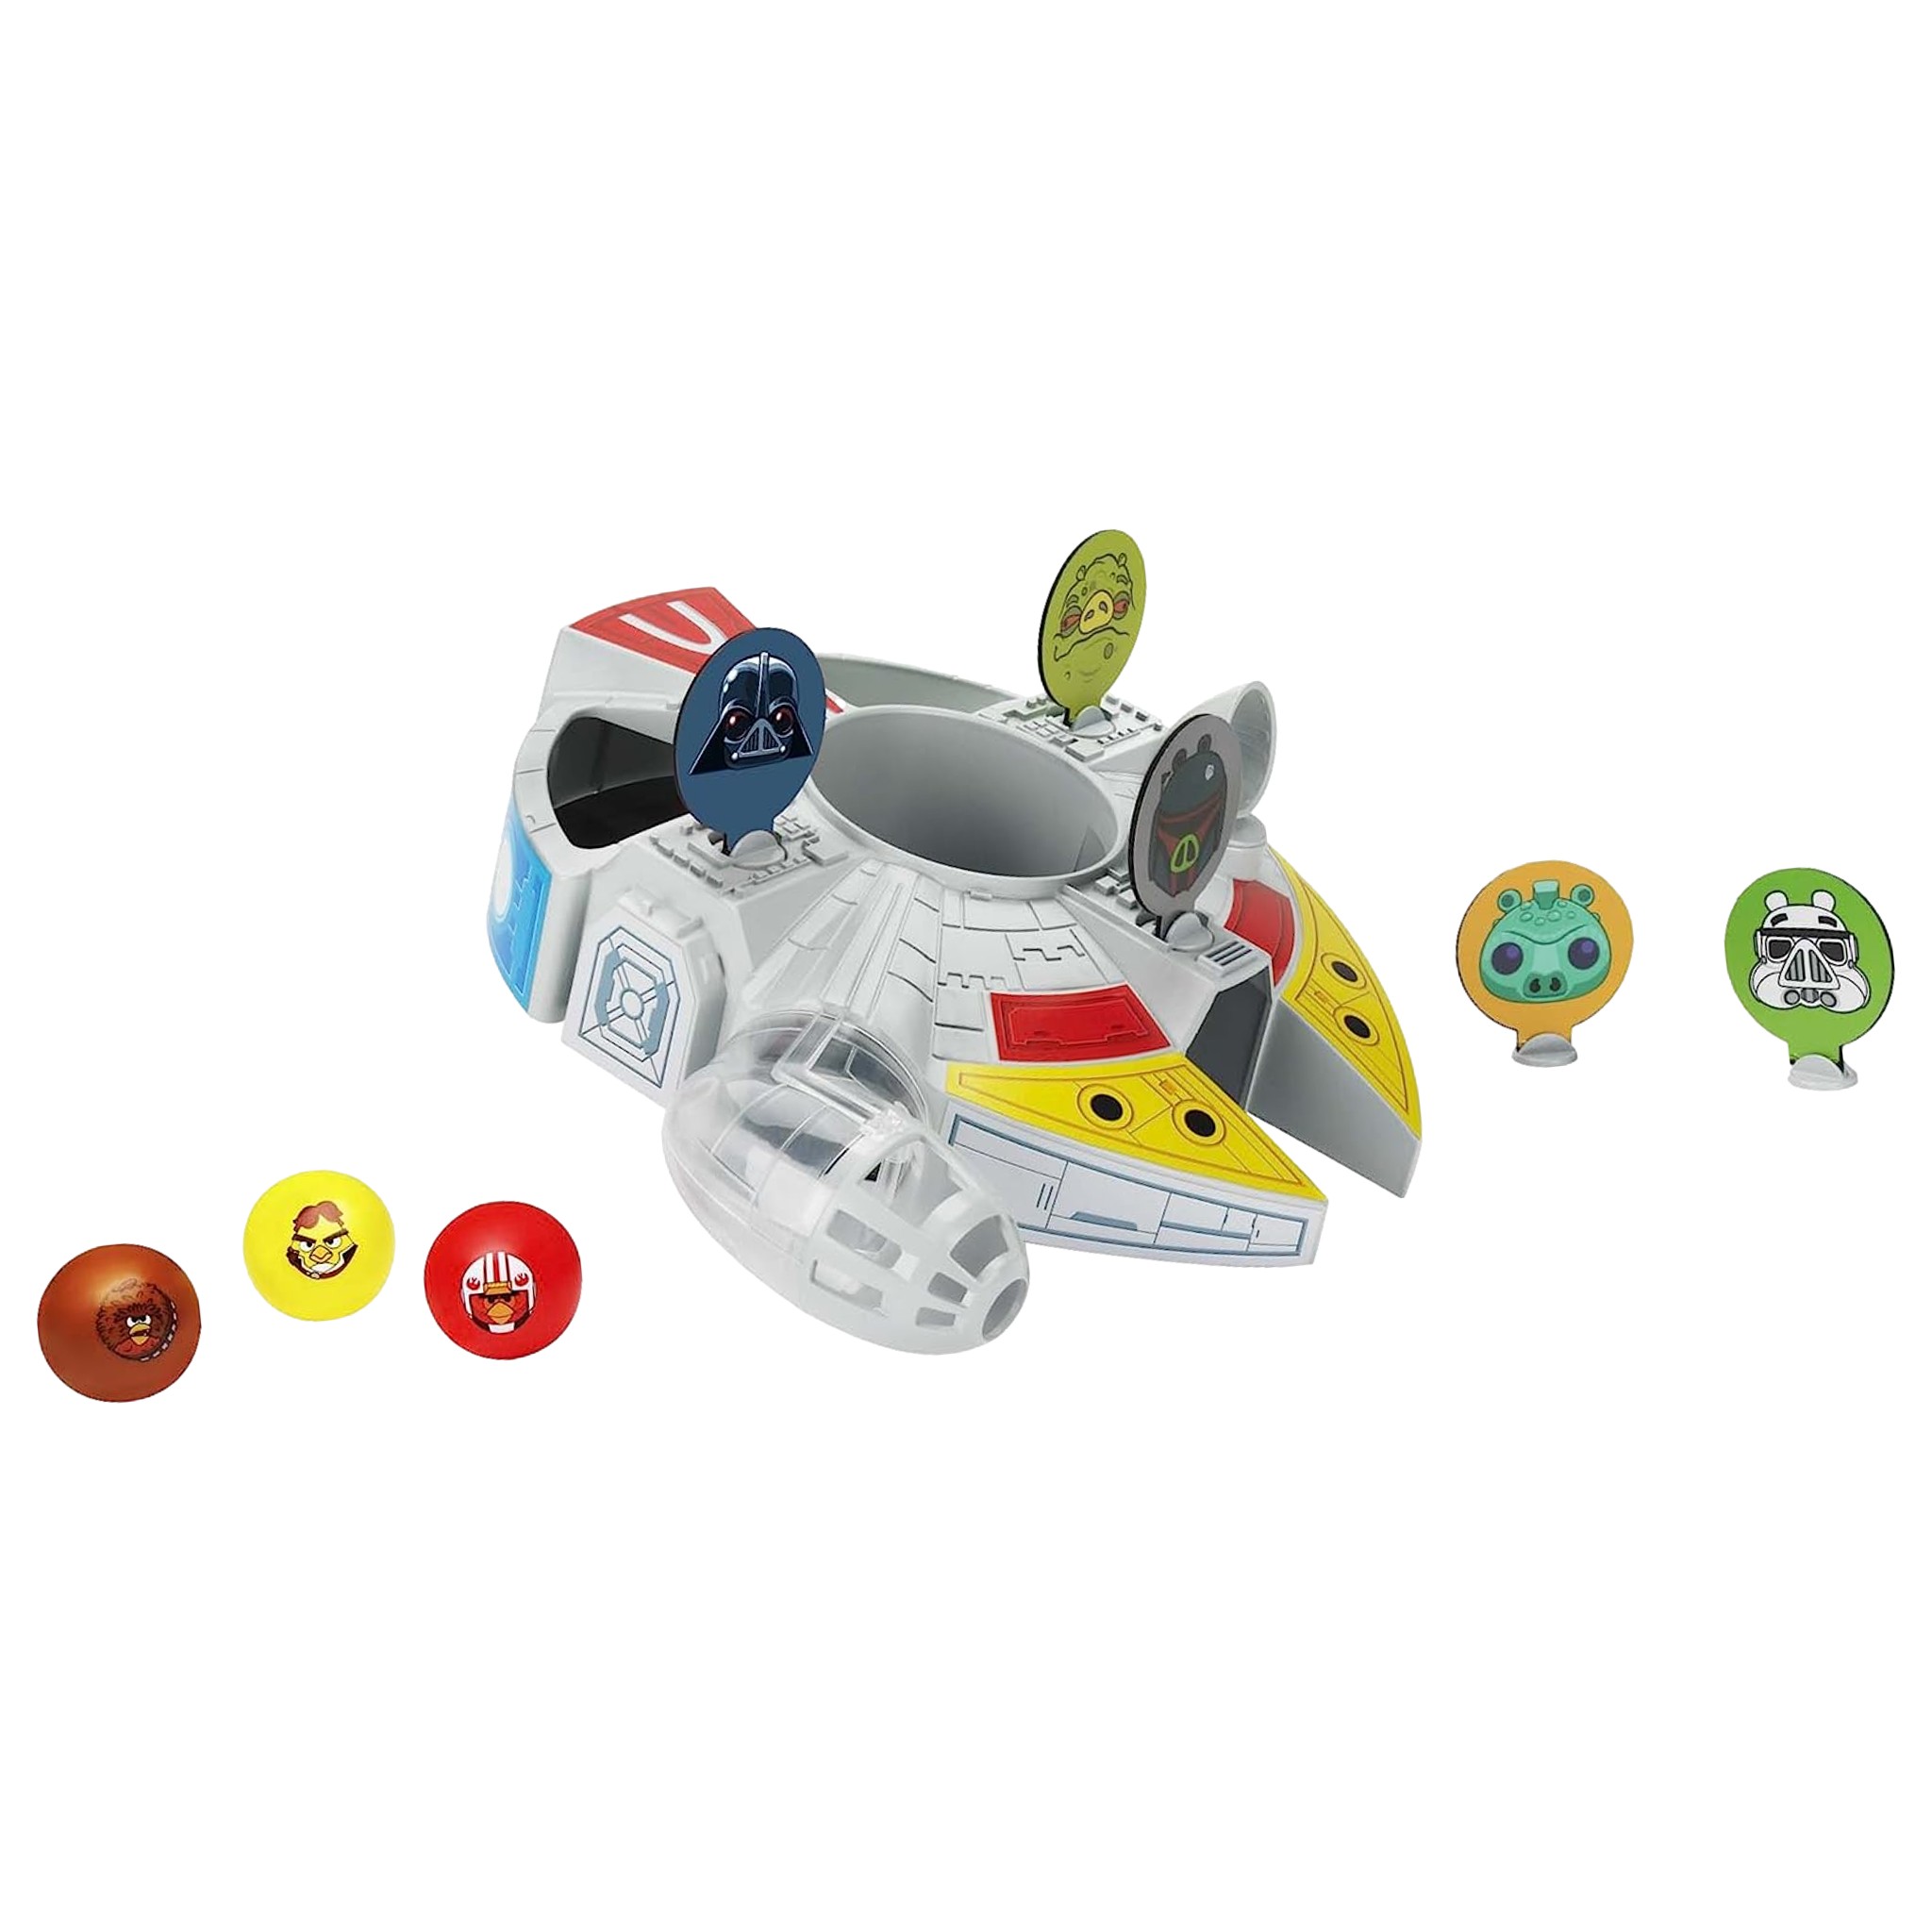 Star Wars Angry Birds Star Wars Millennium Falcon Bounce Game